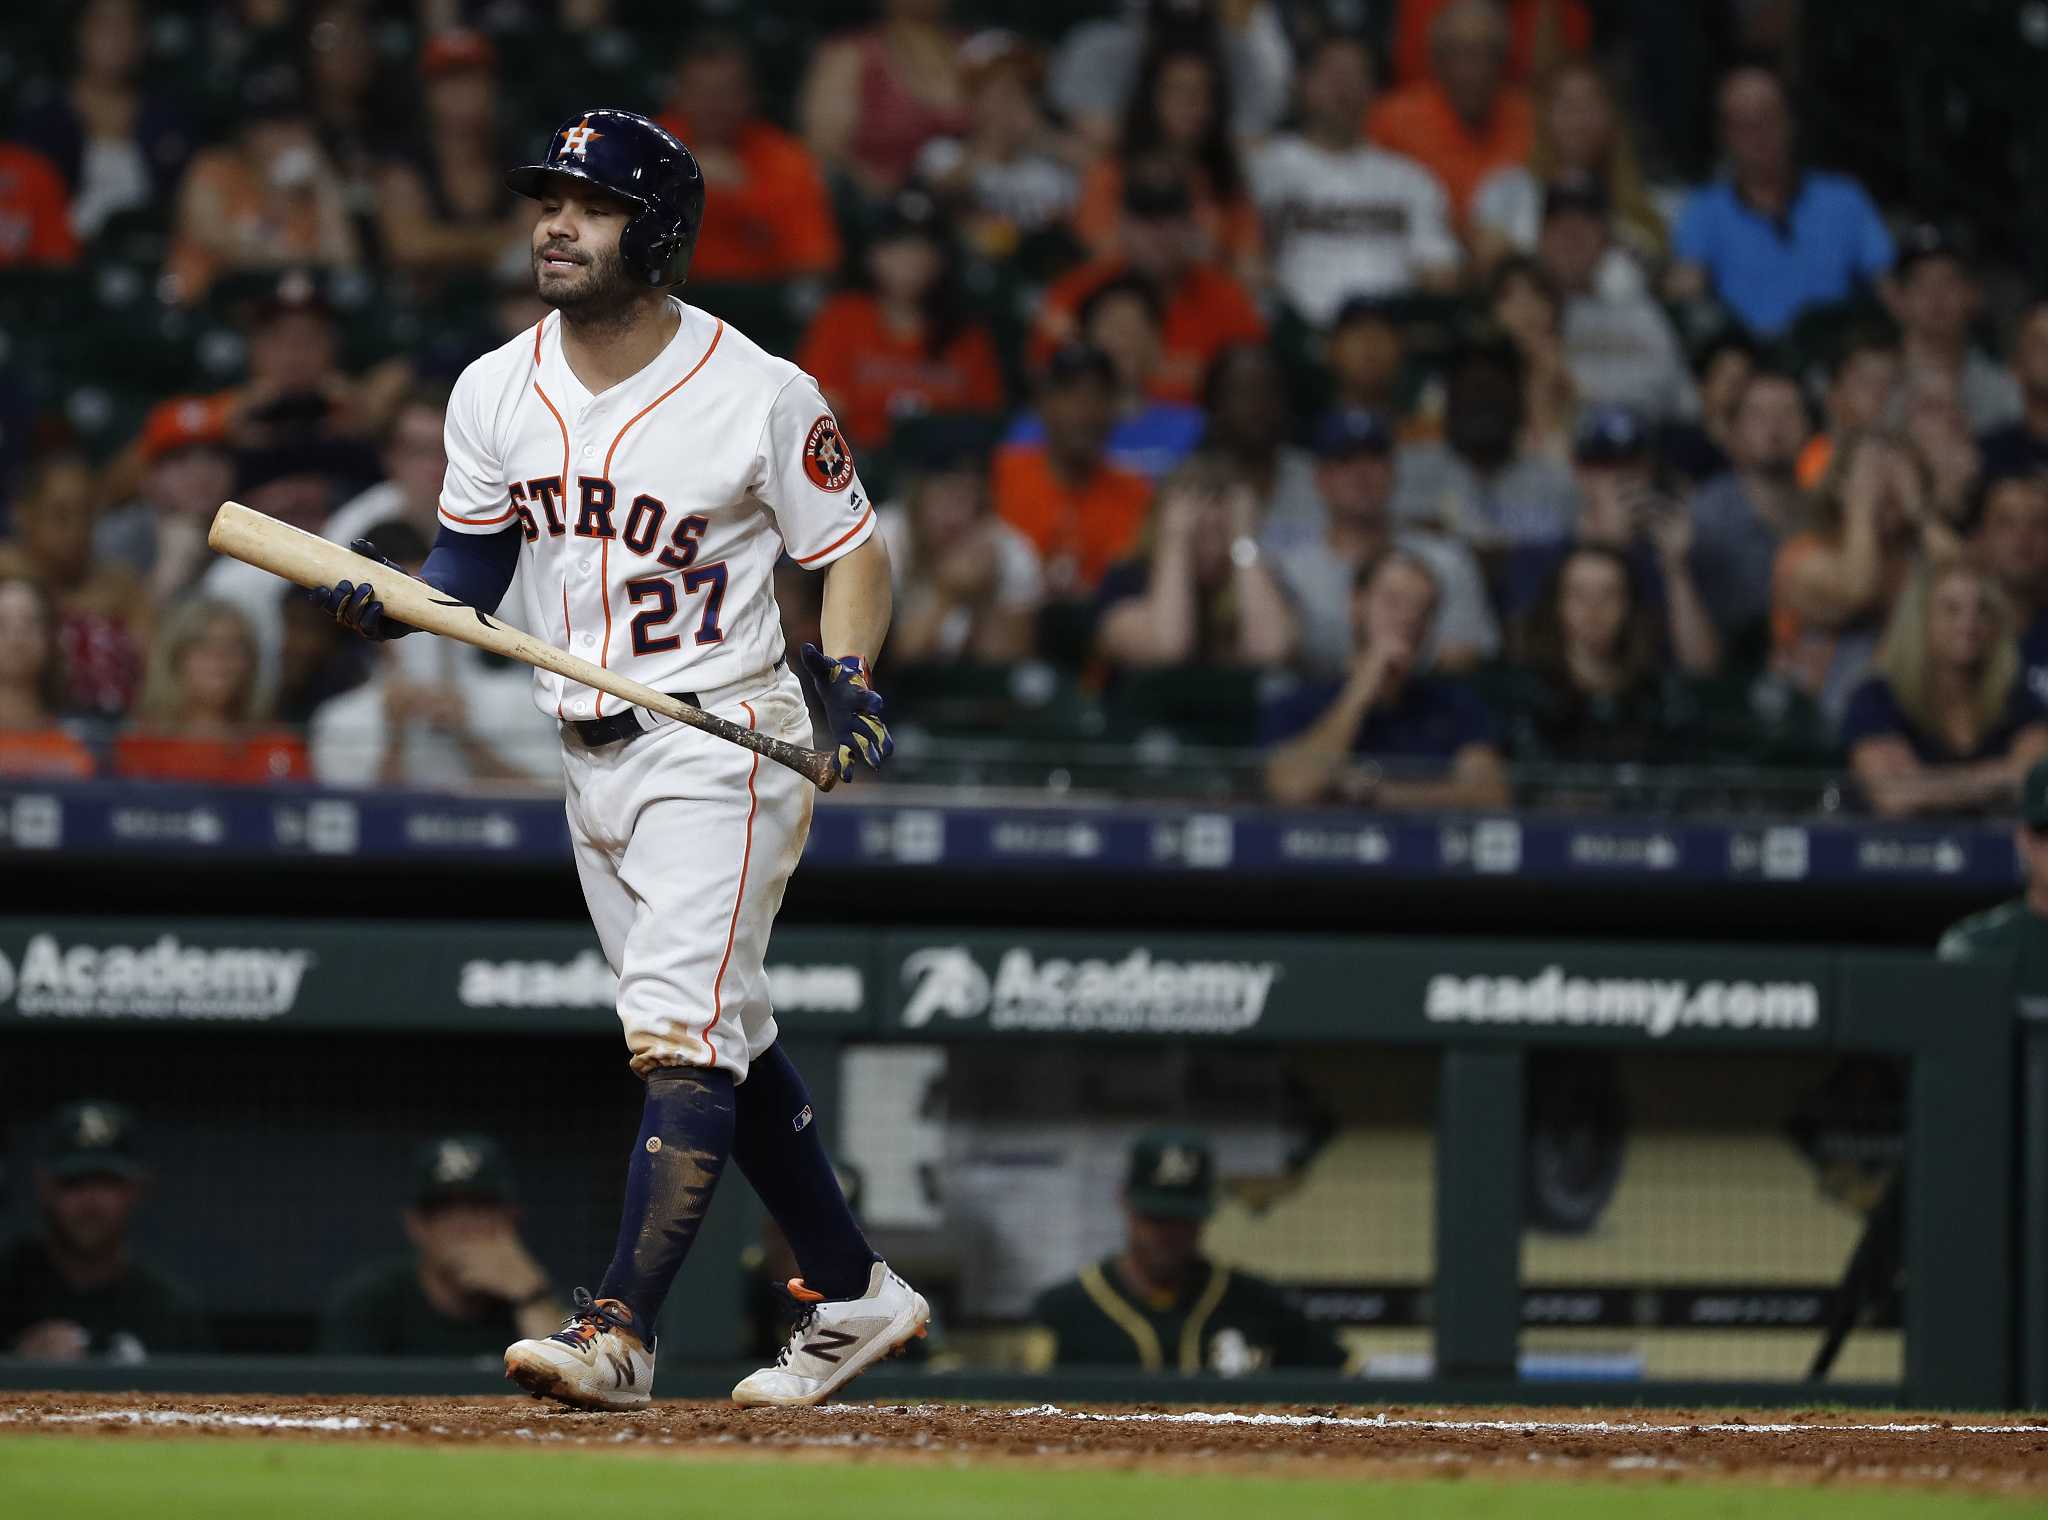 Astros held scoreless in loss to A's 